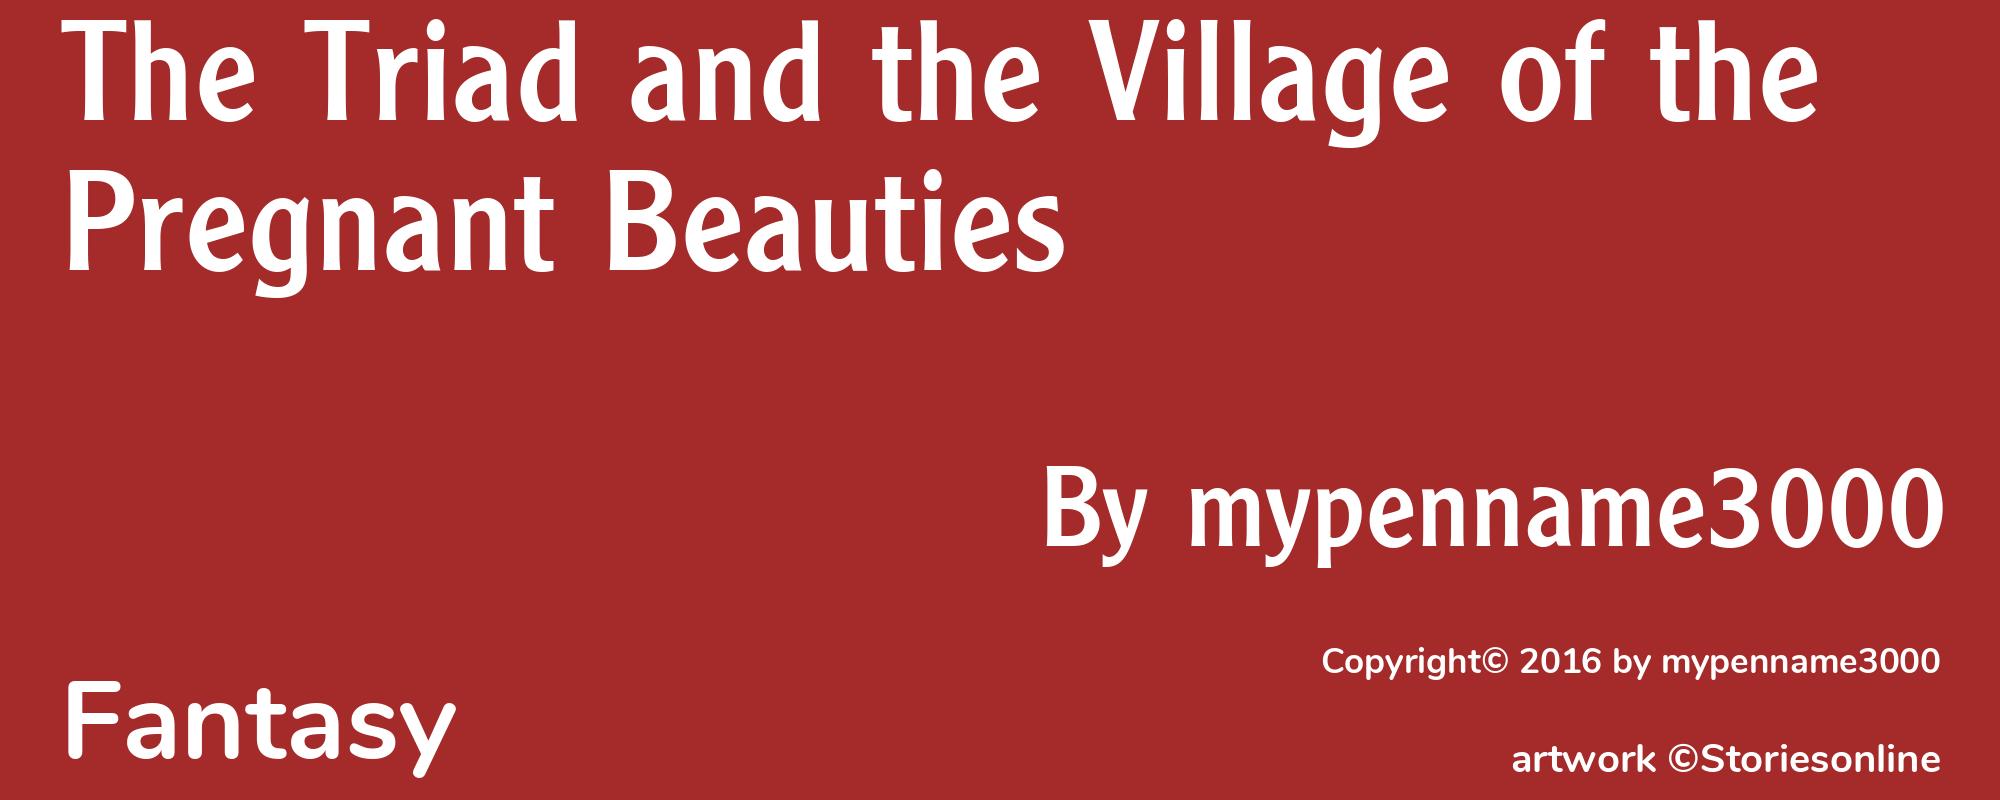 The Triad and the Village of the Pregnant Beauties - Cover